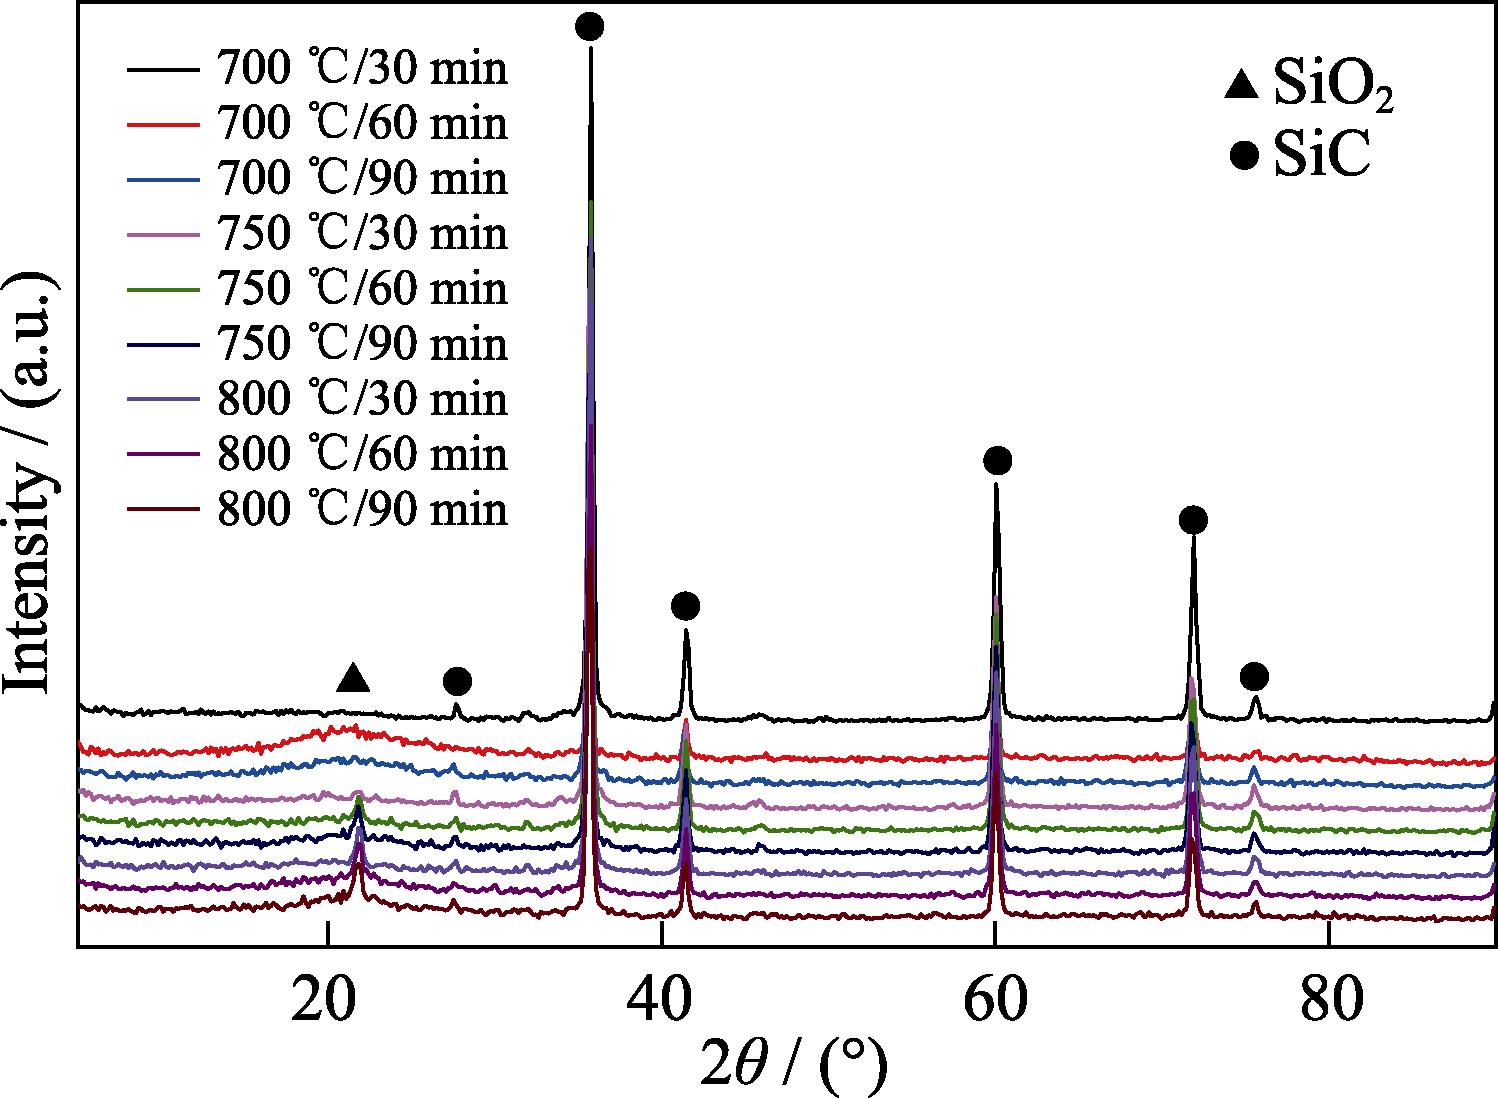 XRD patterns of the SiC whiskers oxidized at different temperatures for different time